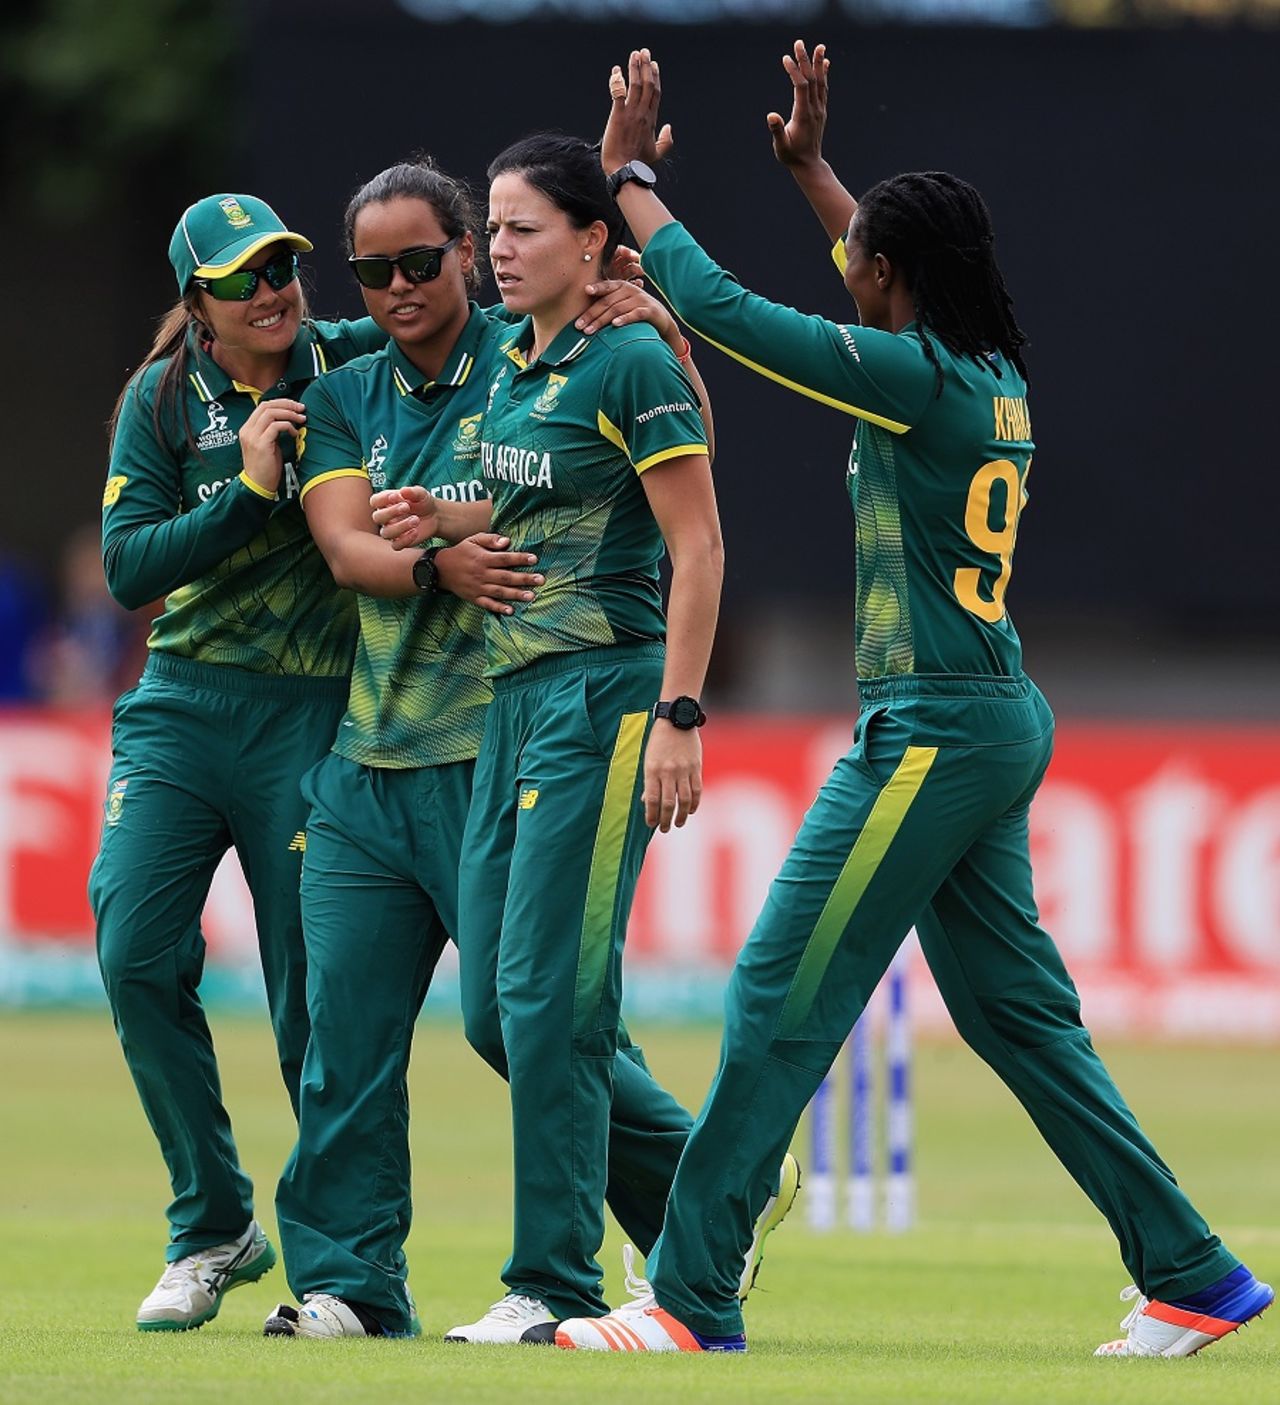 Marizanne Kapp bowled Harmanpreet Kaur, India v South Africa, Women's World Cup 2017, Leicester, July 8, 2017